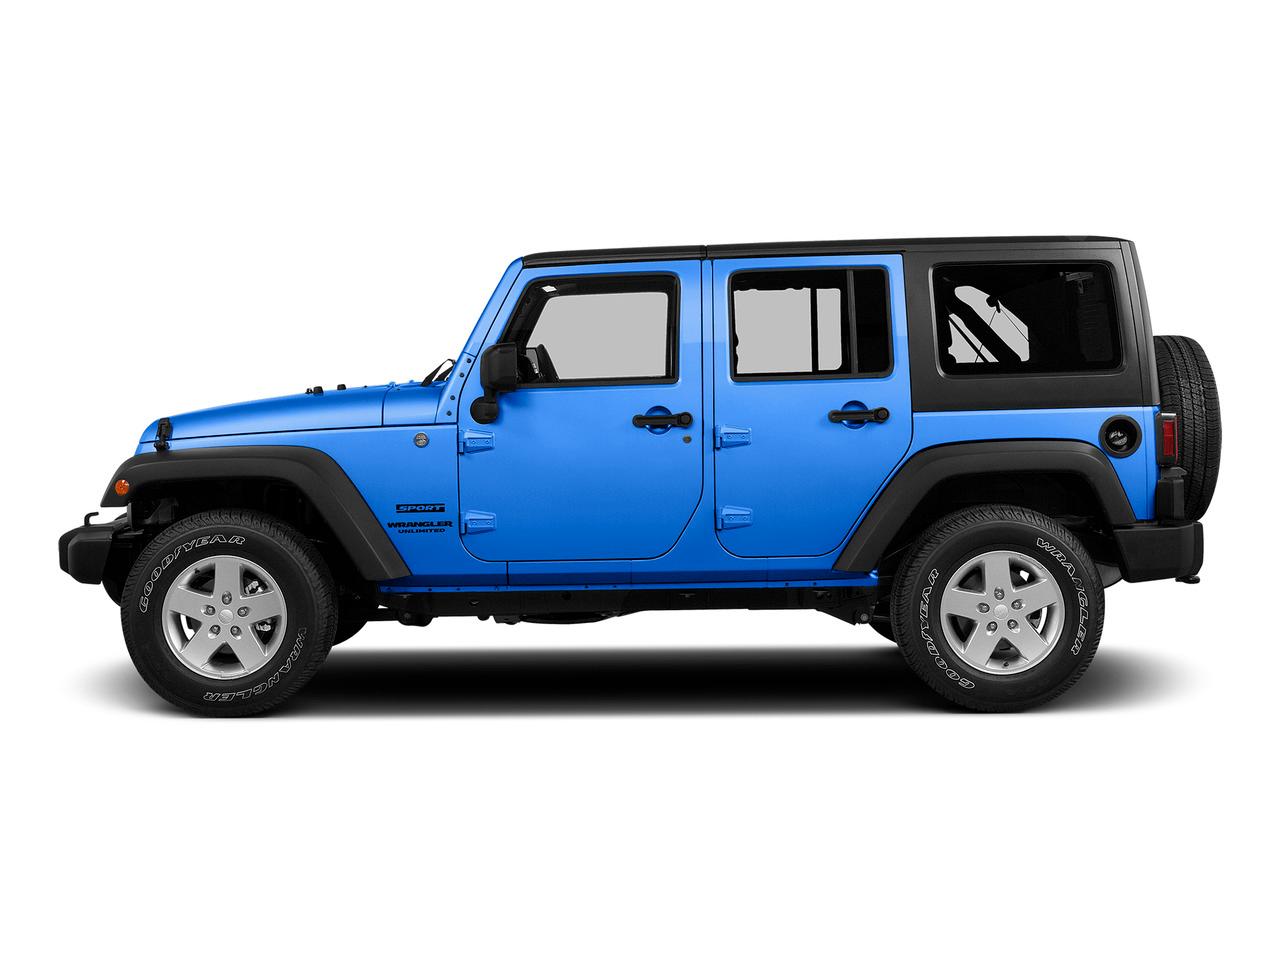 Used 2015 Jeep Wrangler Unlimited 4WD 4dr Sport in Blue for sale in  CHADRON, Nebraska - T2397